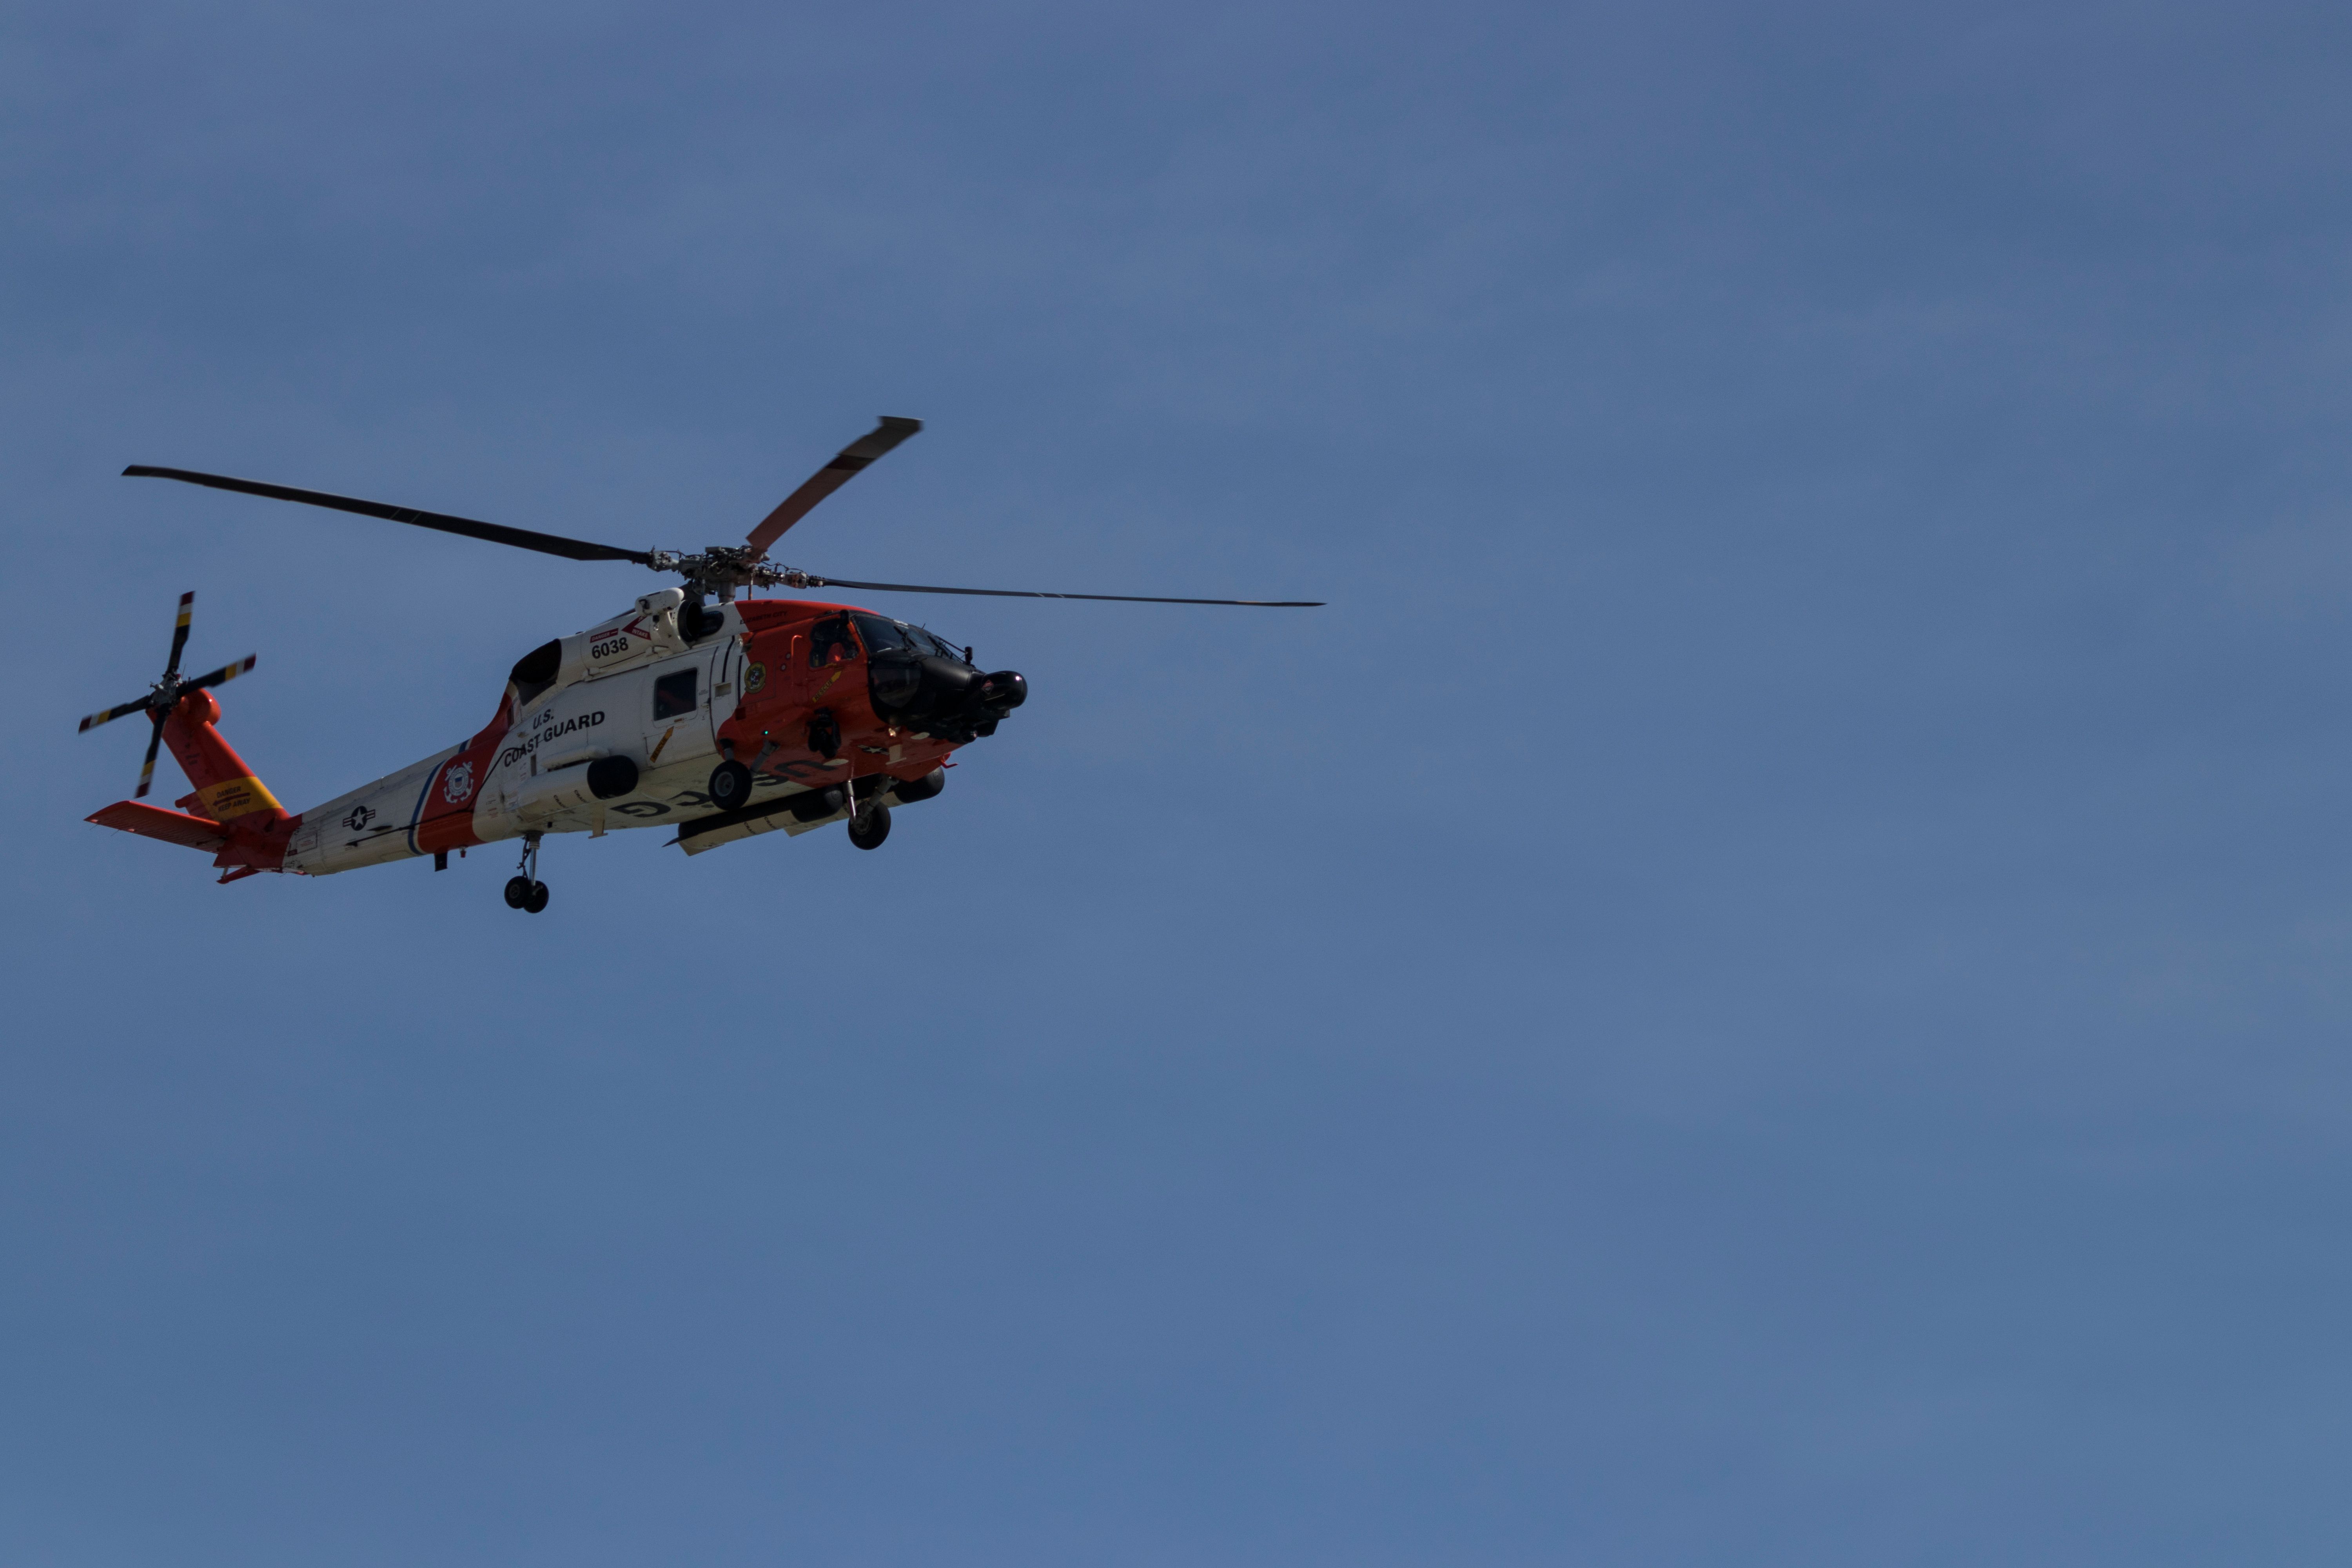 A U.S. Coast Guard Sikorksy MH-60 Jayhawk hovering in the sky.